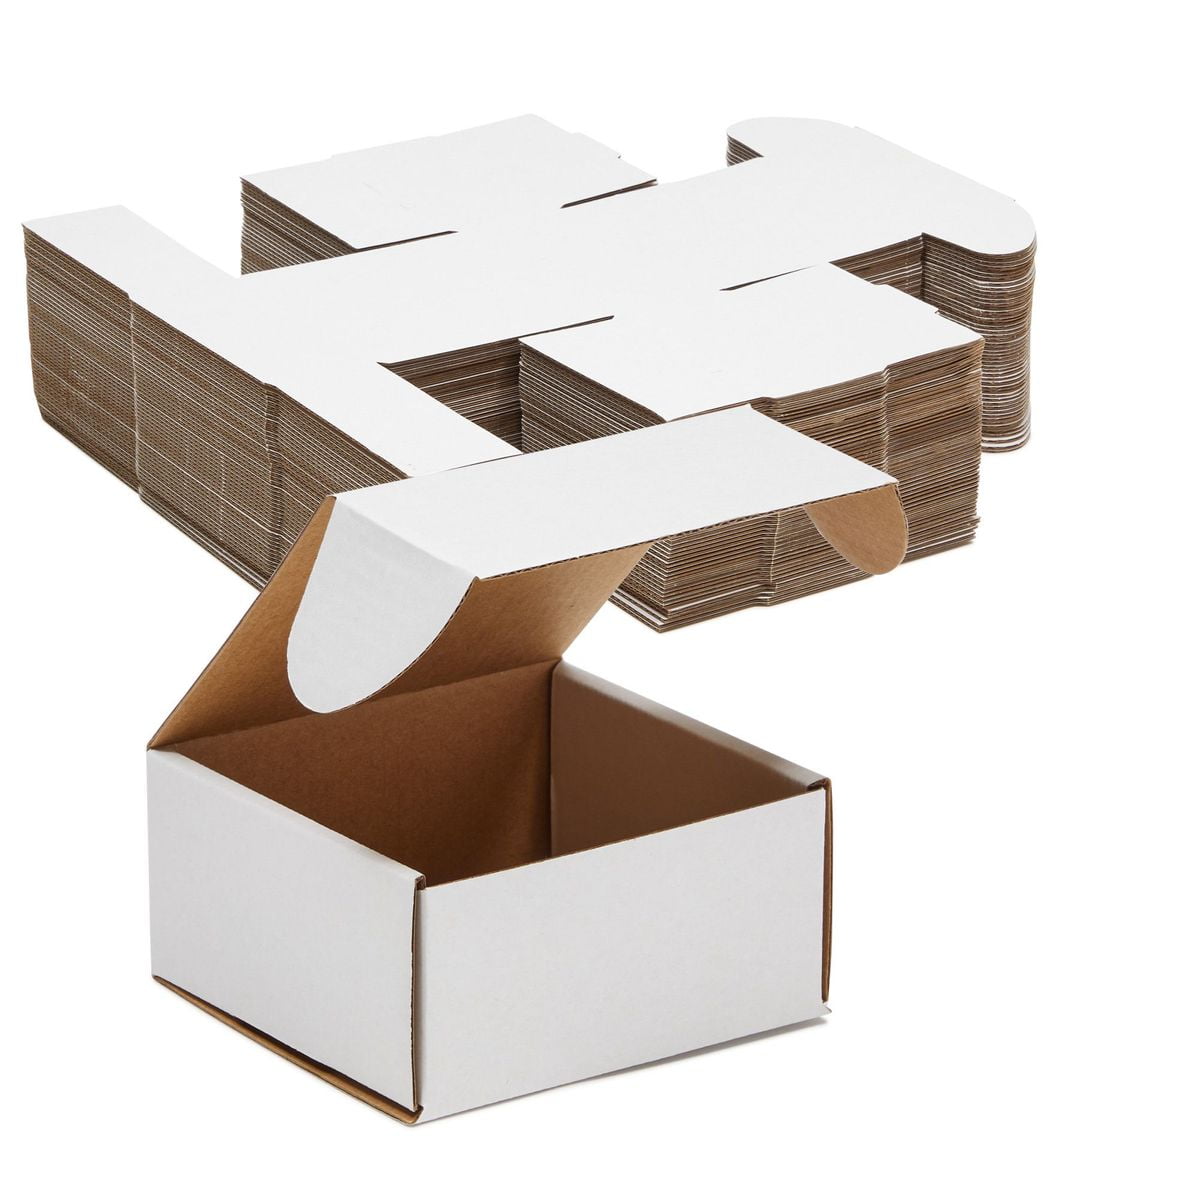 20 Pack 5x5x5 White Corrugated Shipping Mailer Packing Box Boxes 5" x 5" x 5"